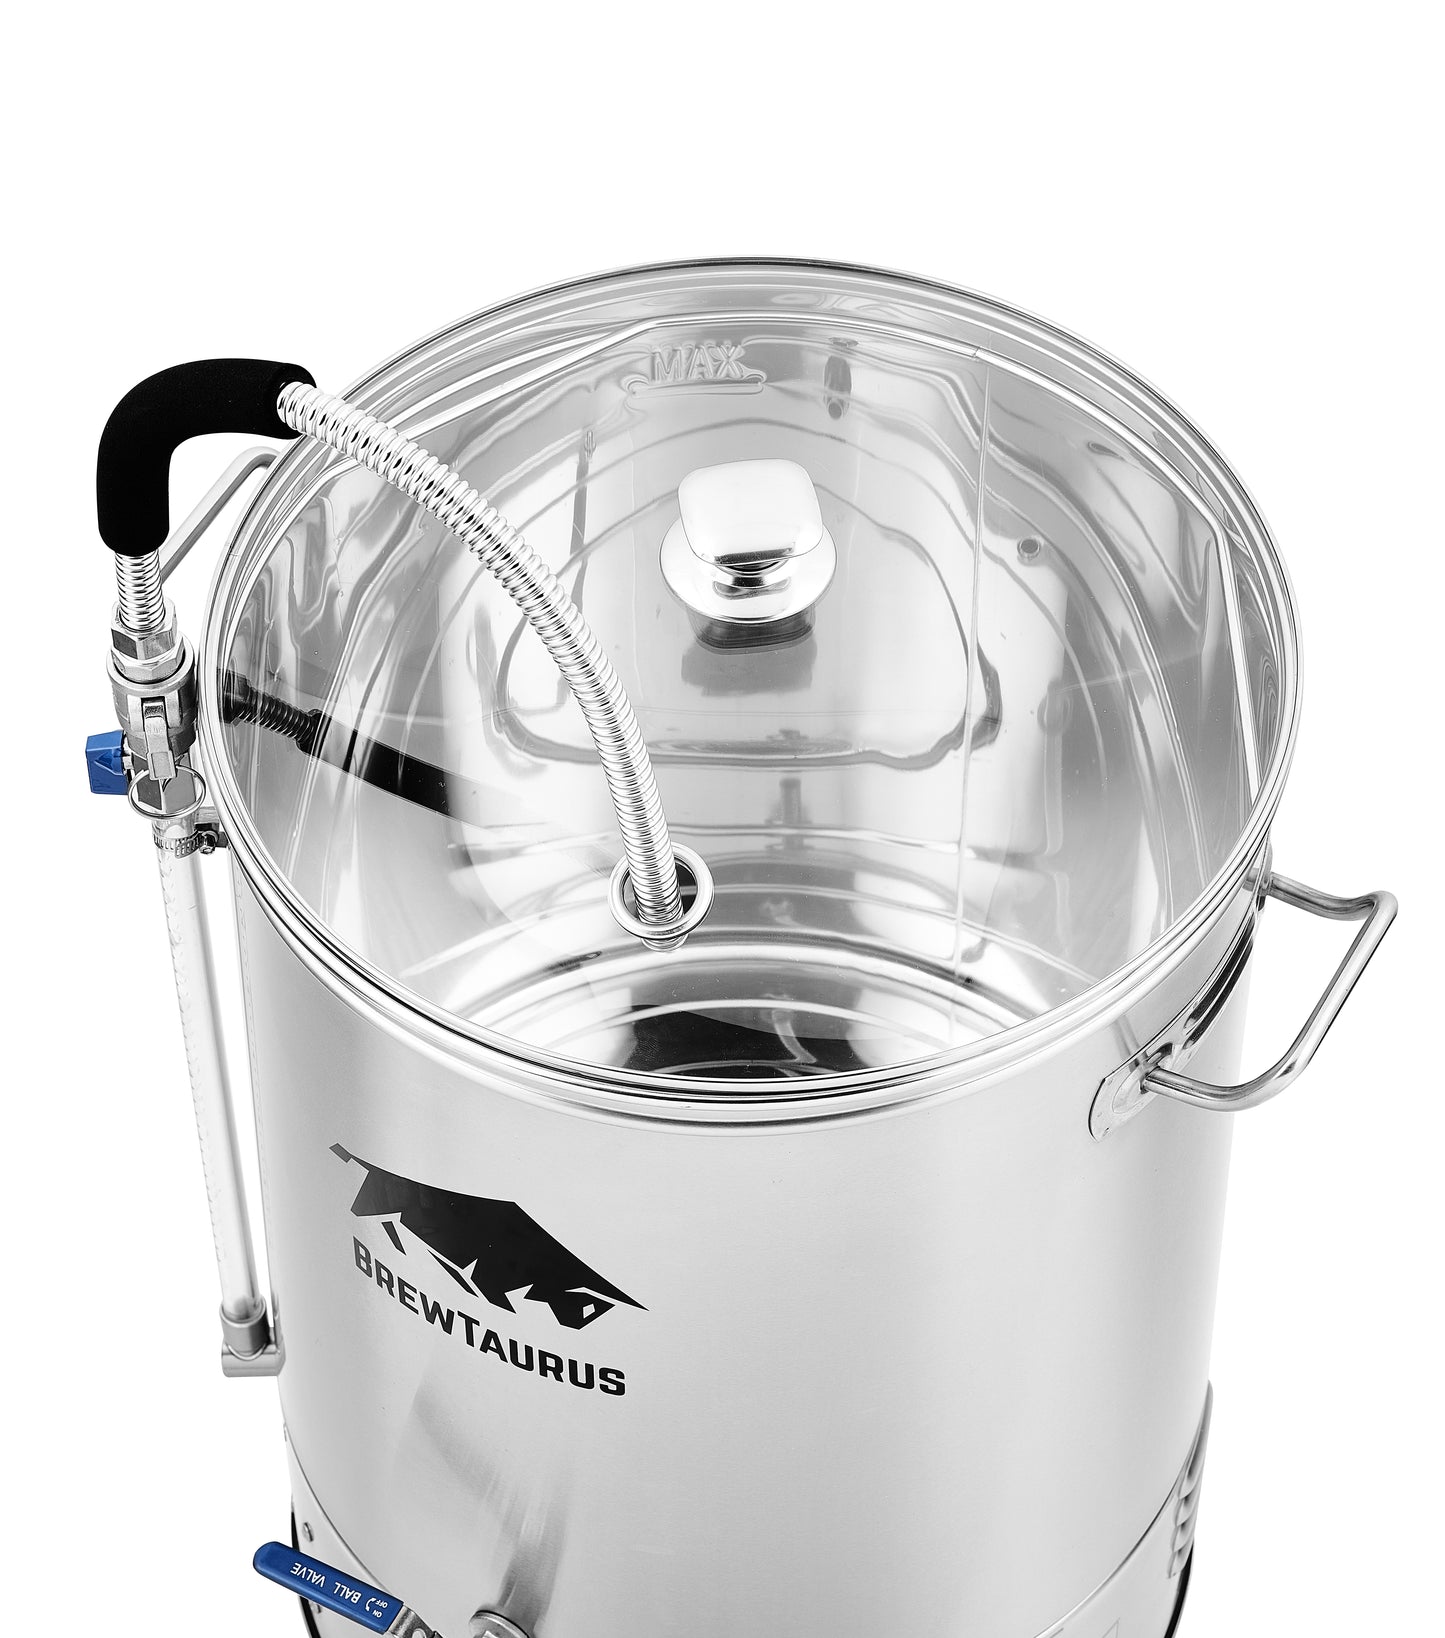 *NEW* B65L Brewing System - SECOND FACTORY - NO BASKET